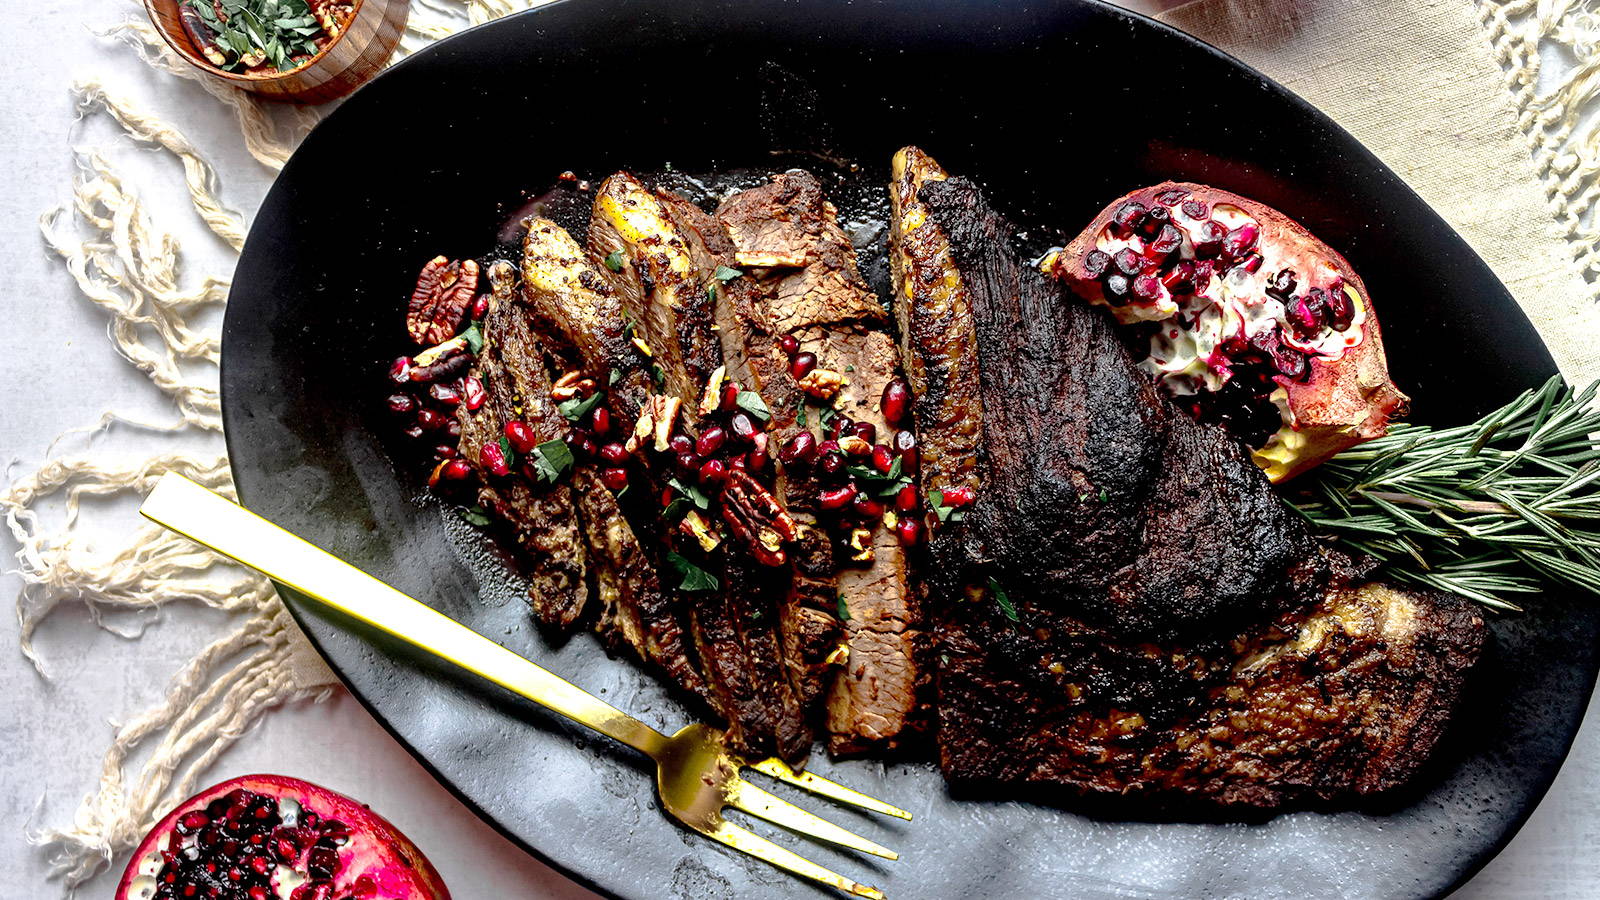 Gourmend recipe for low fodmap brisket in pomegranate rosemary sauce